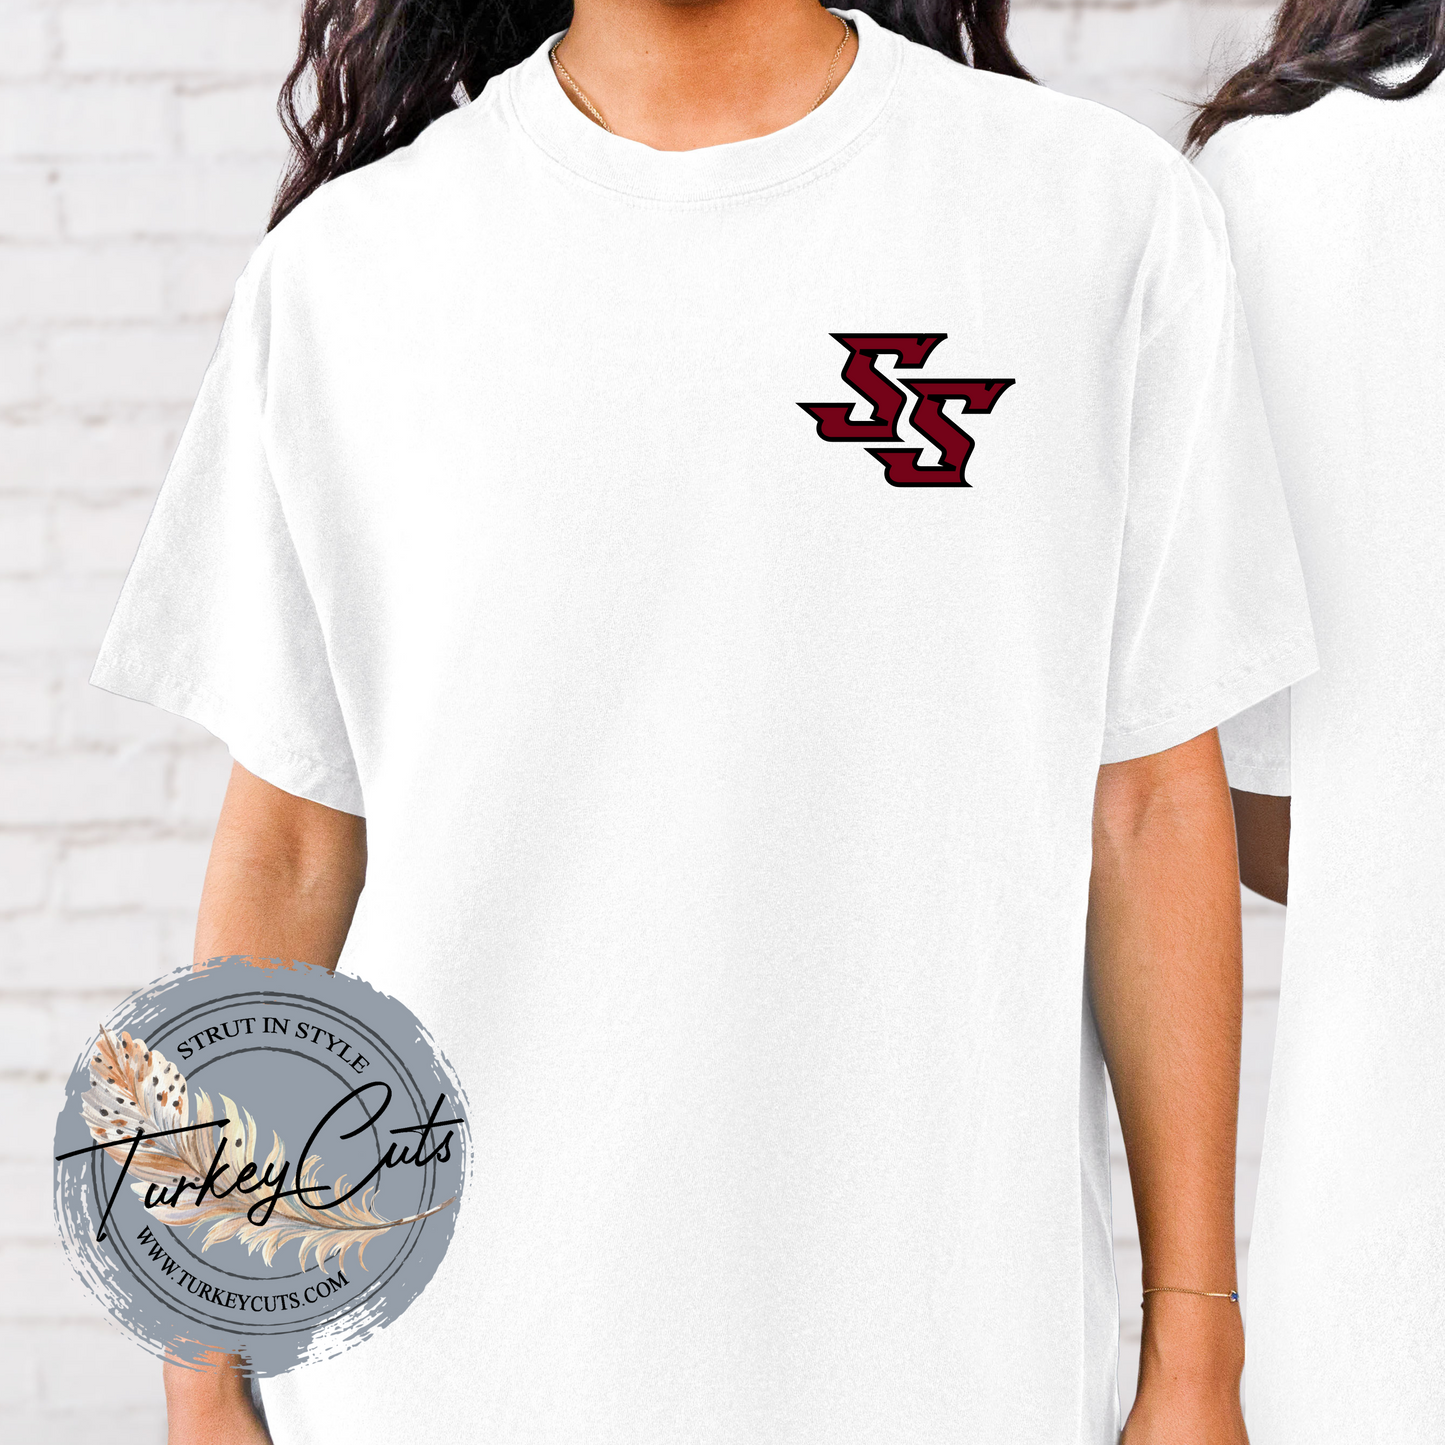 Southern Swag Team Roster Tee (available for 10U, 12U, & 14U)